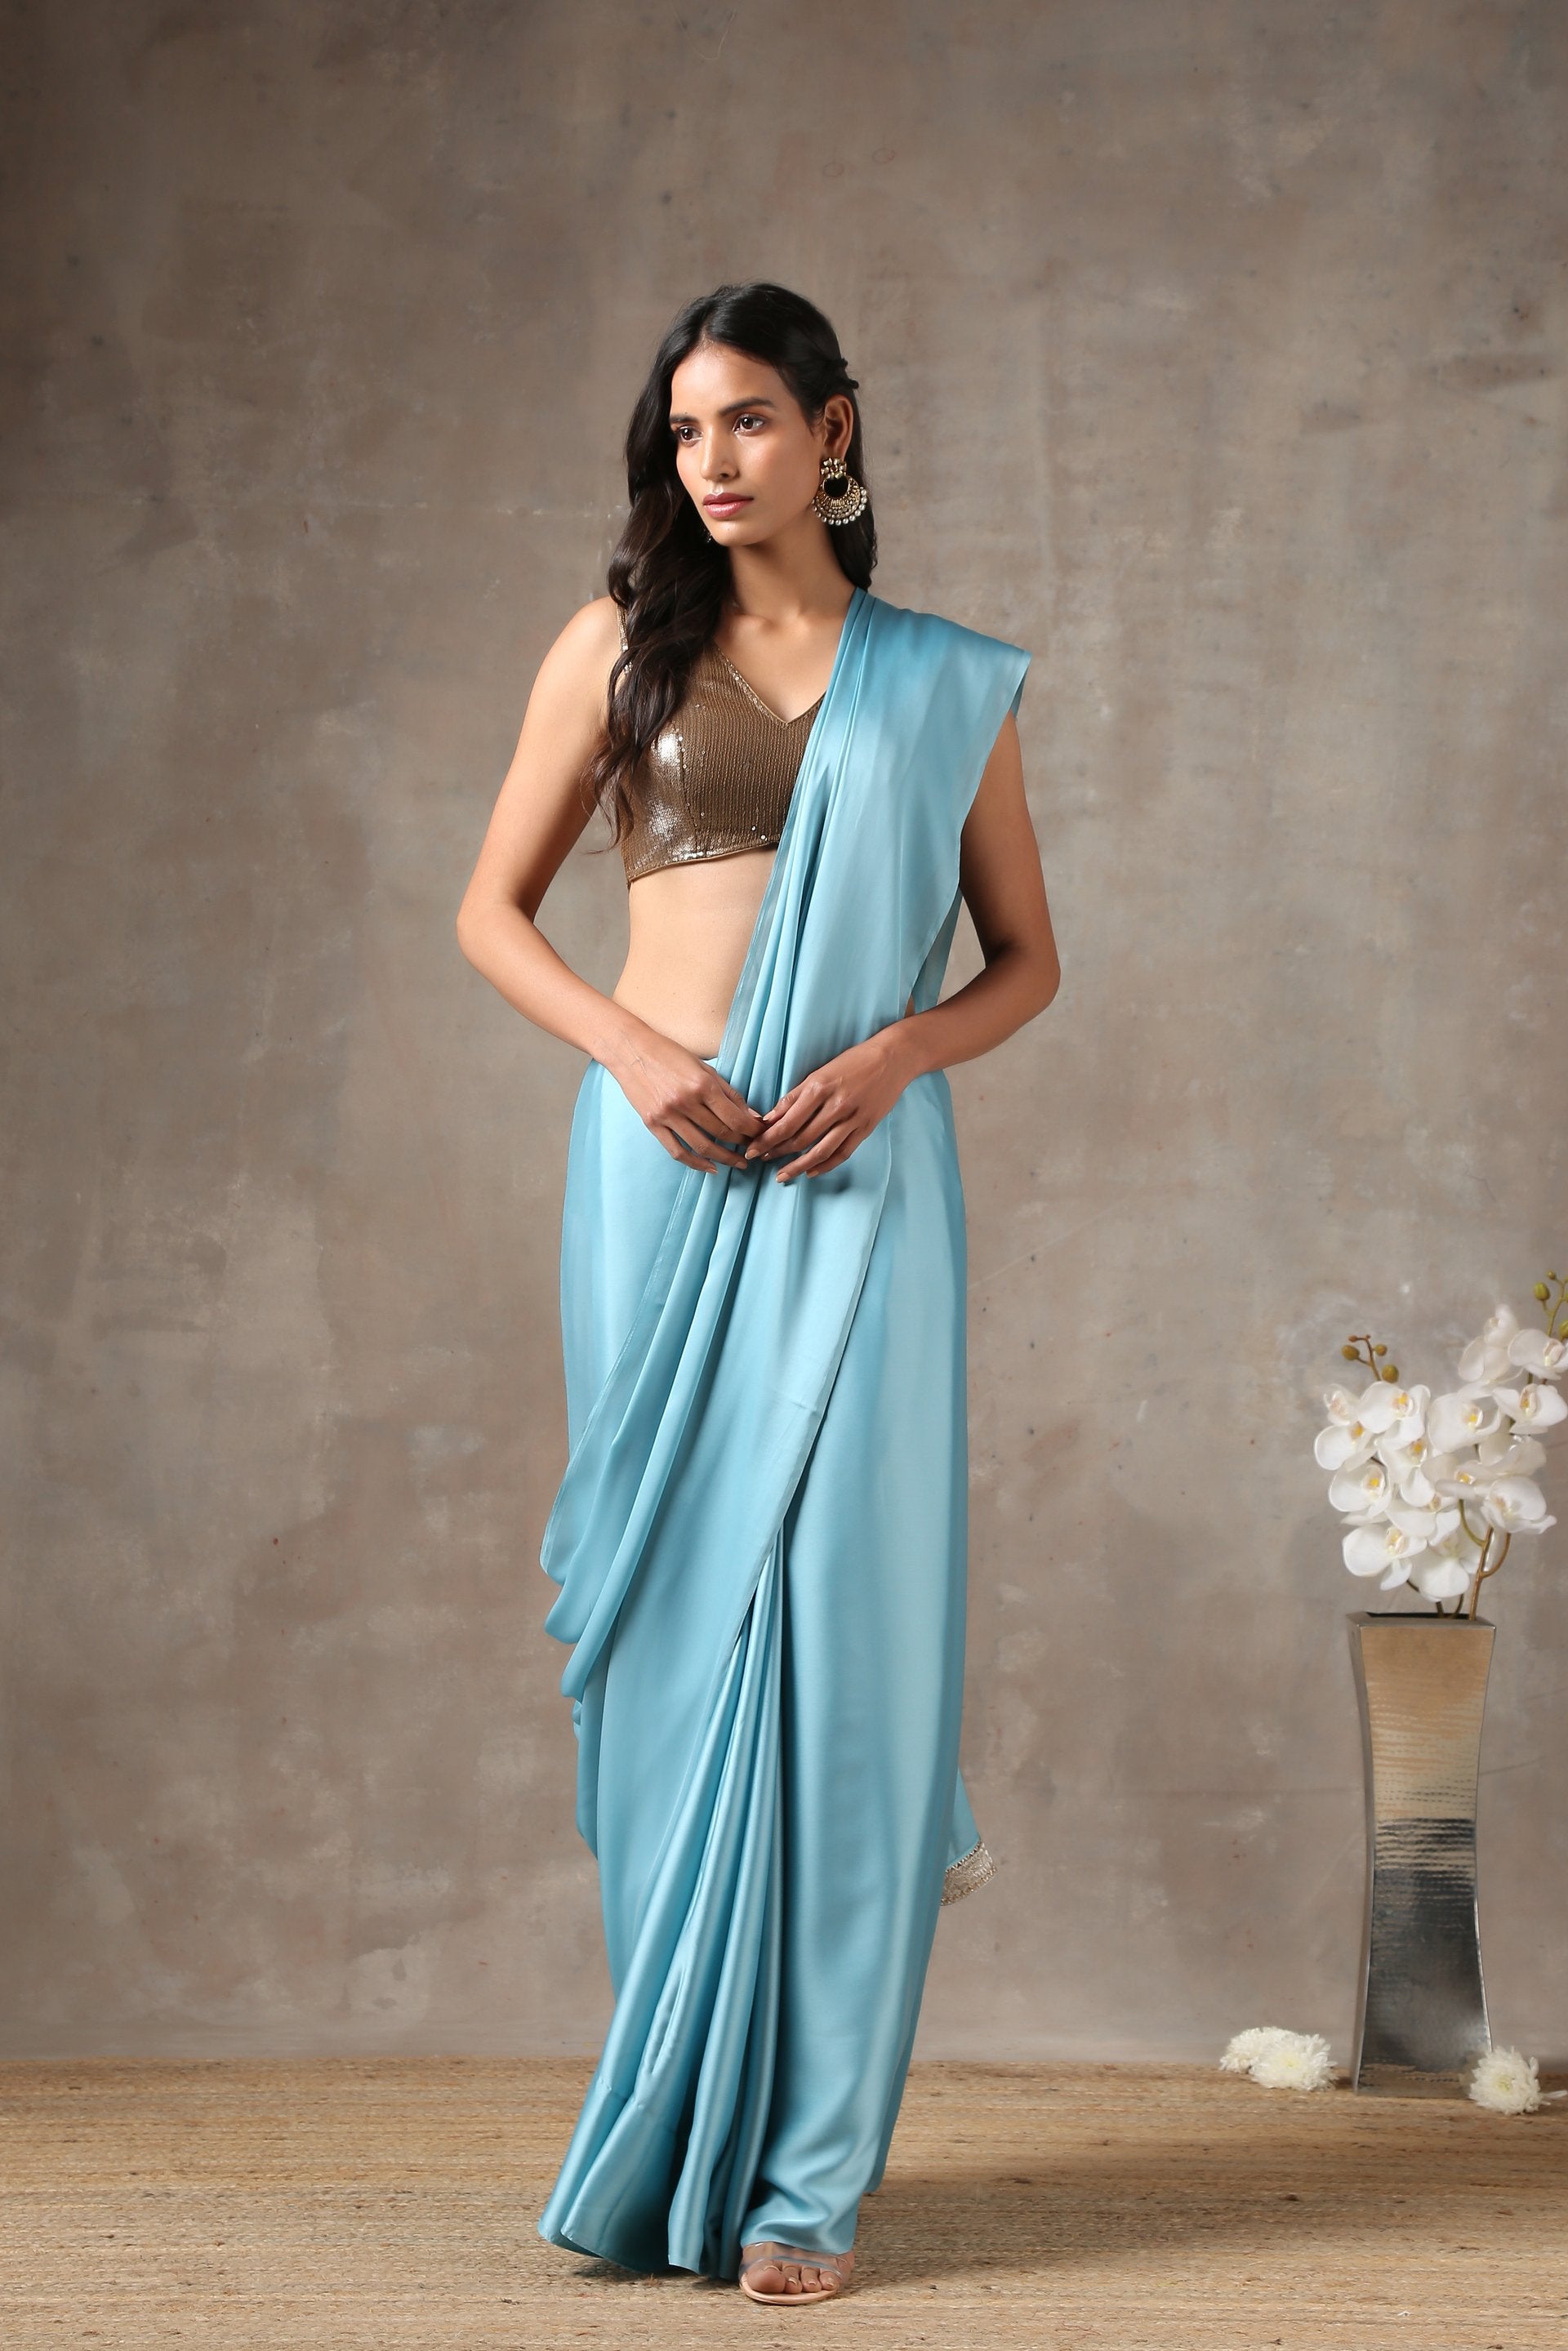 4 Secrets For Looking Slim In Saree Without Losing Any Weight!, by Big  bindi